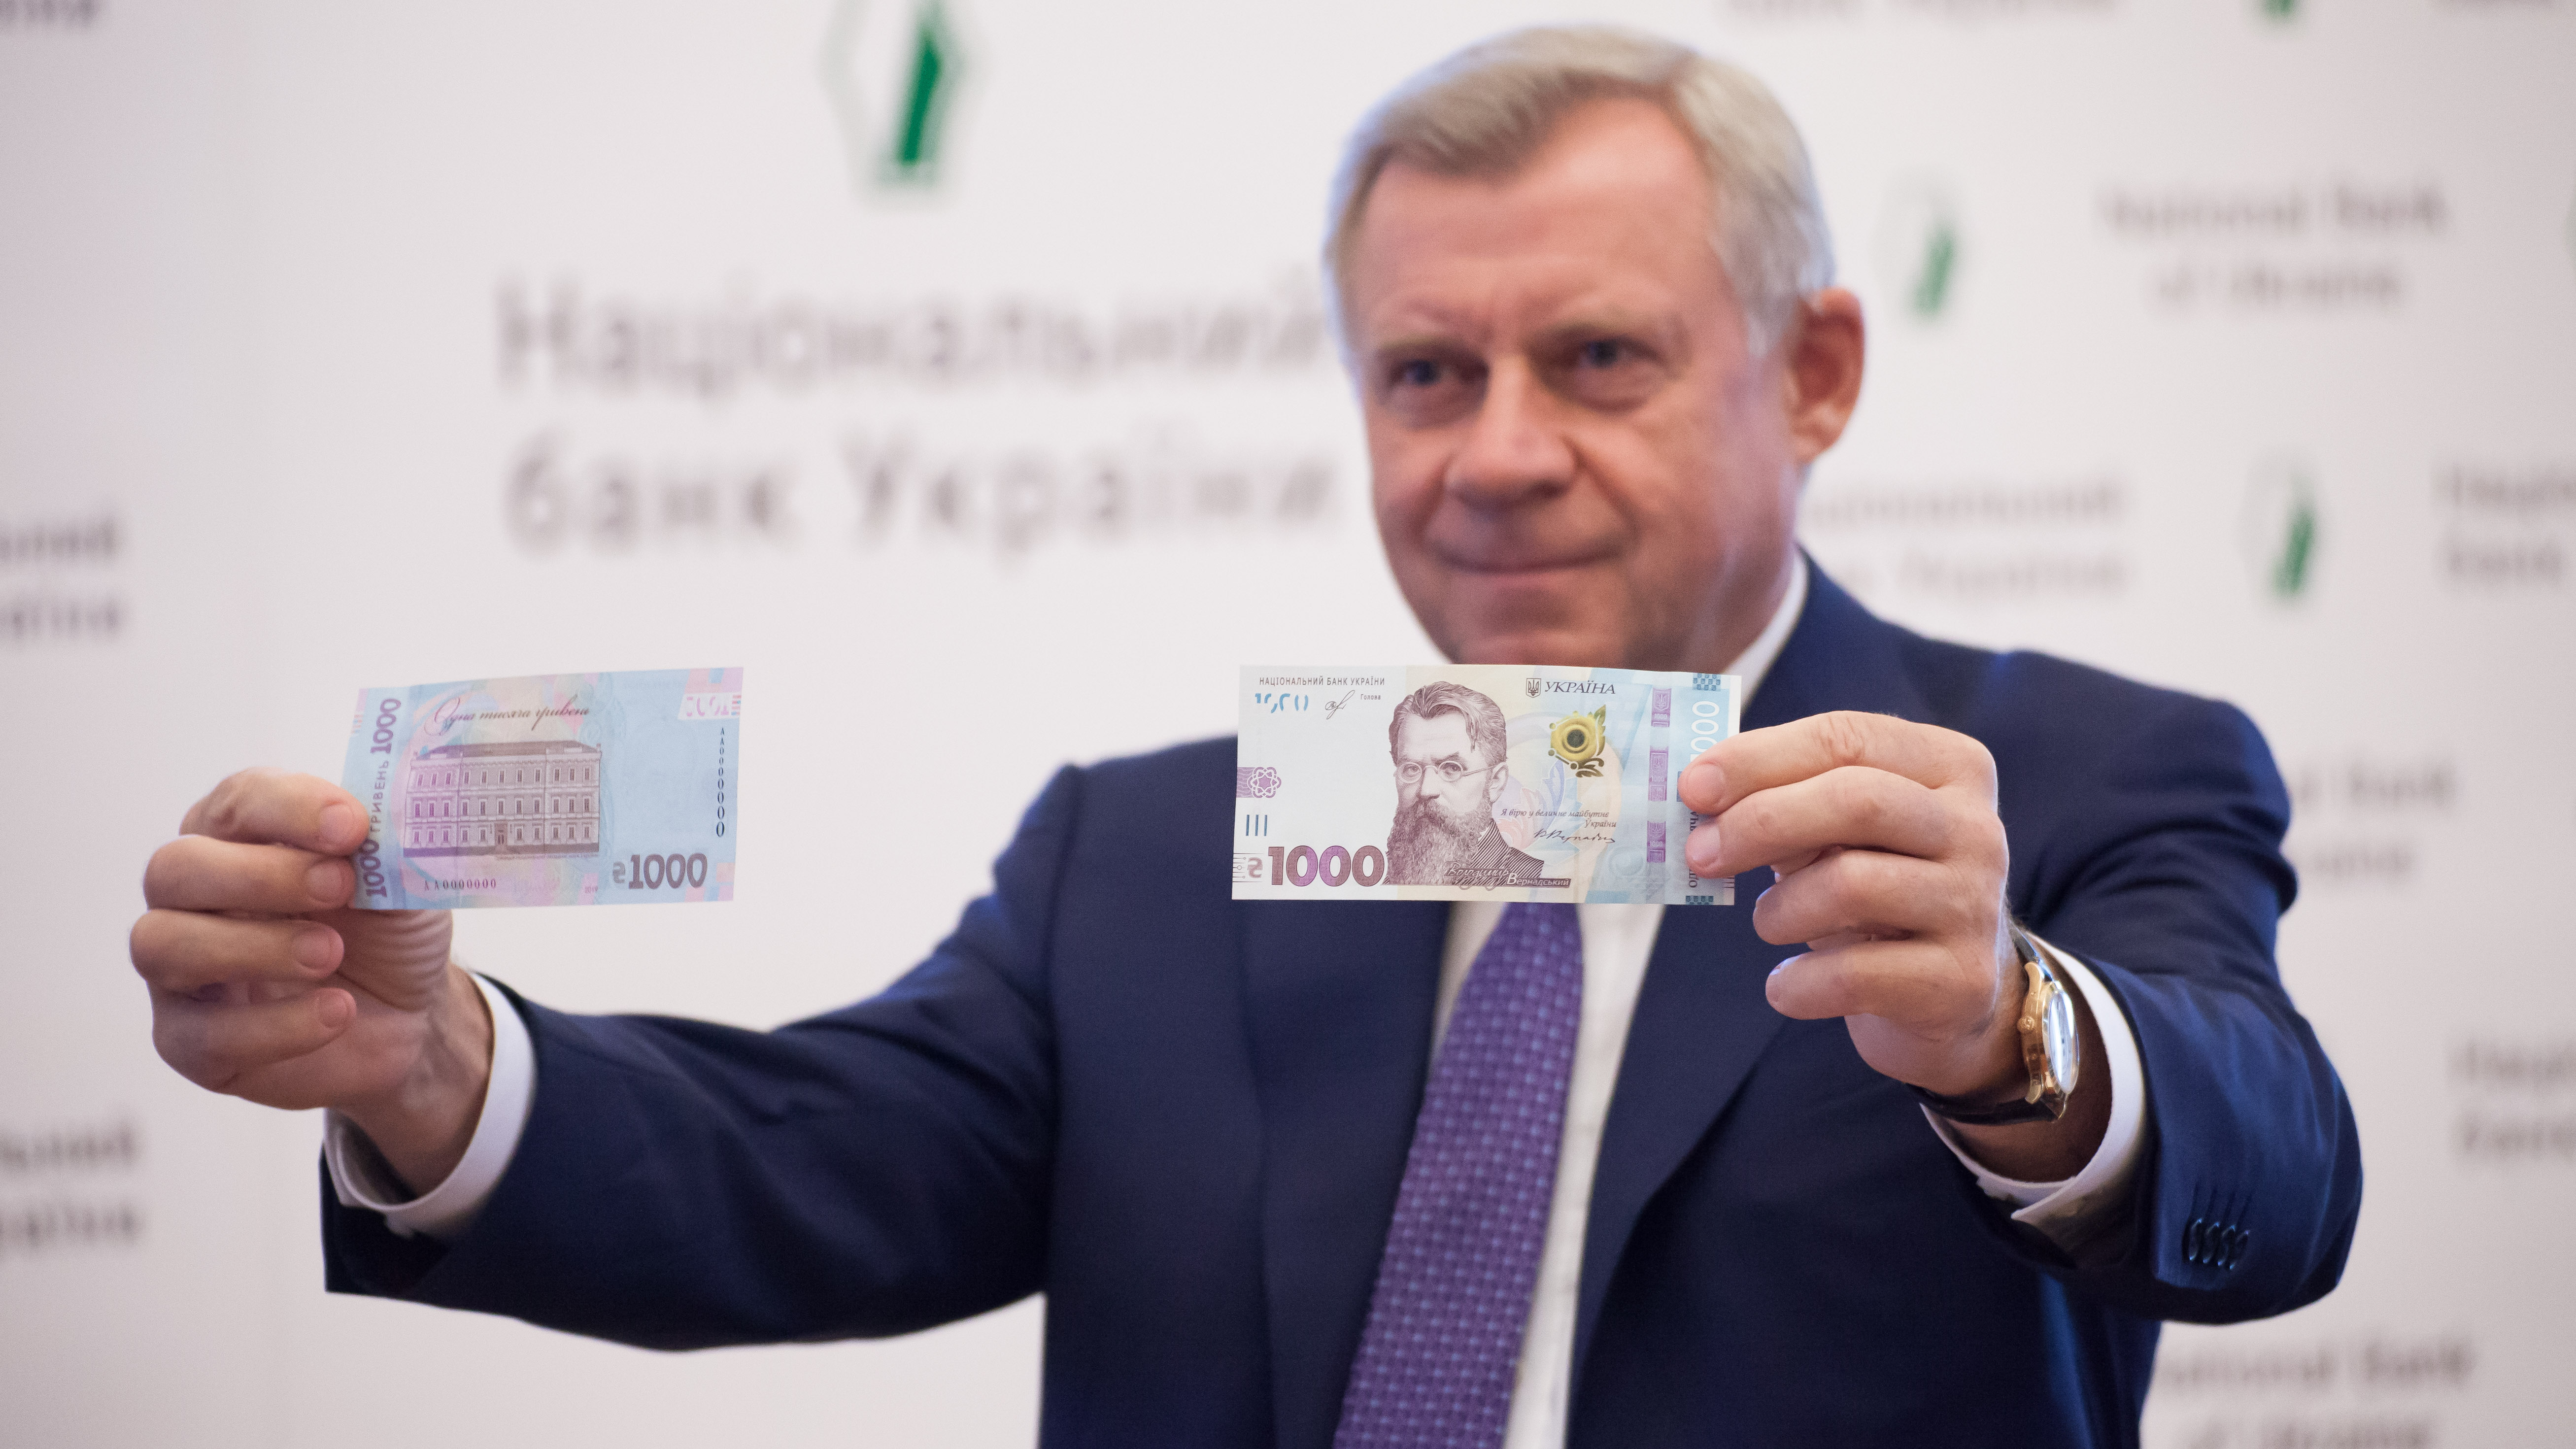 Speech by NBU Governor Yakiv Smolii at a press briefing on optimization of the denominations of banknotes and coins of hryvnia